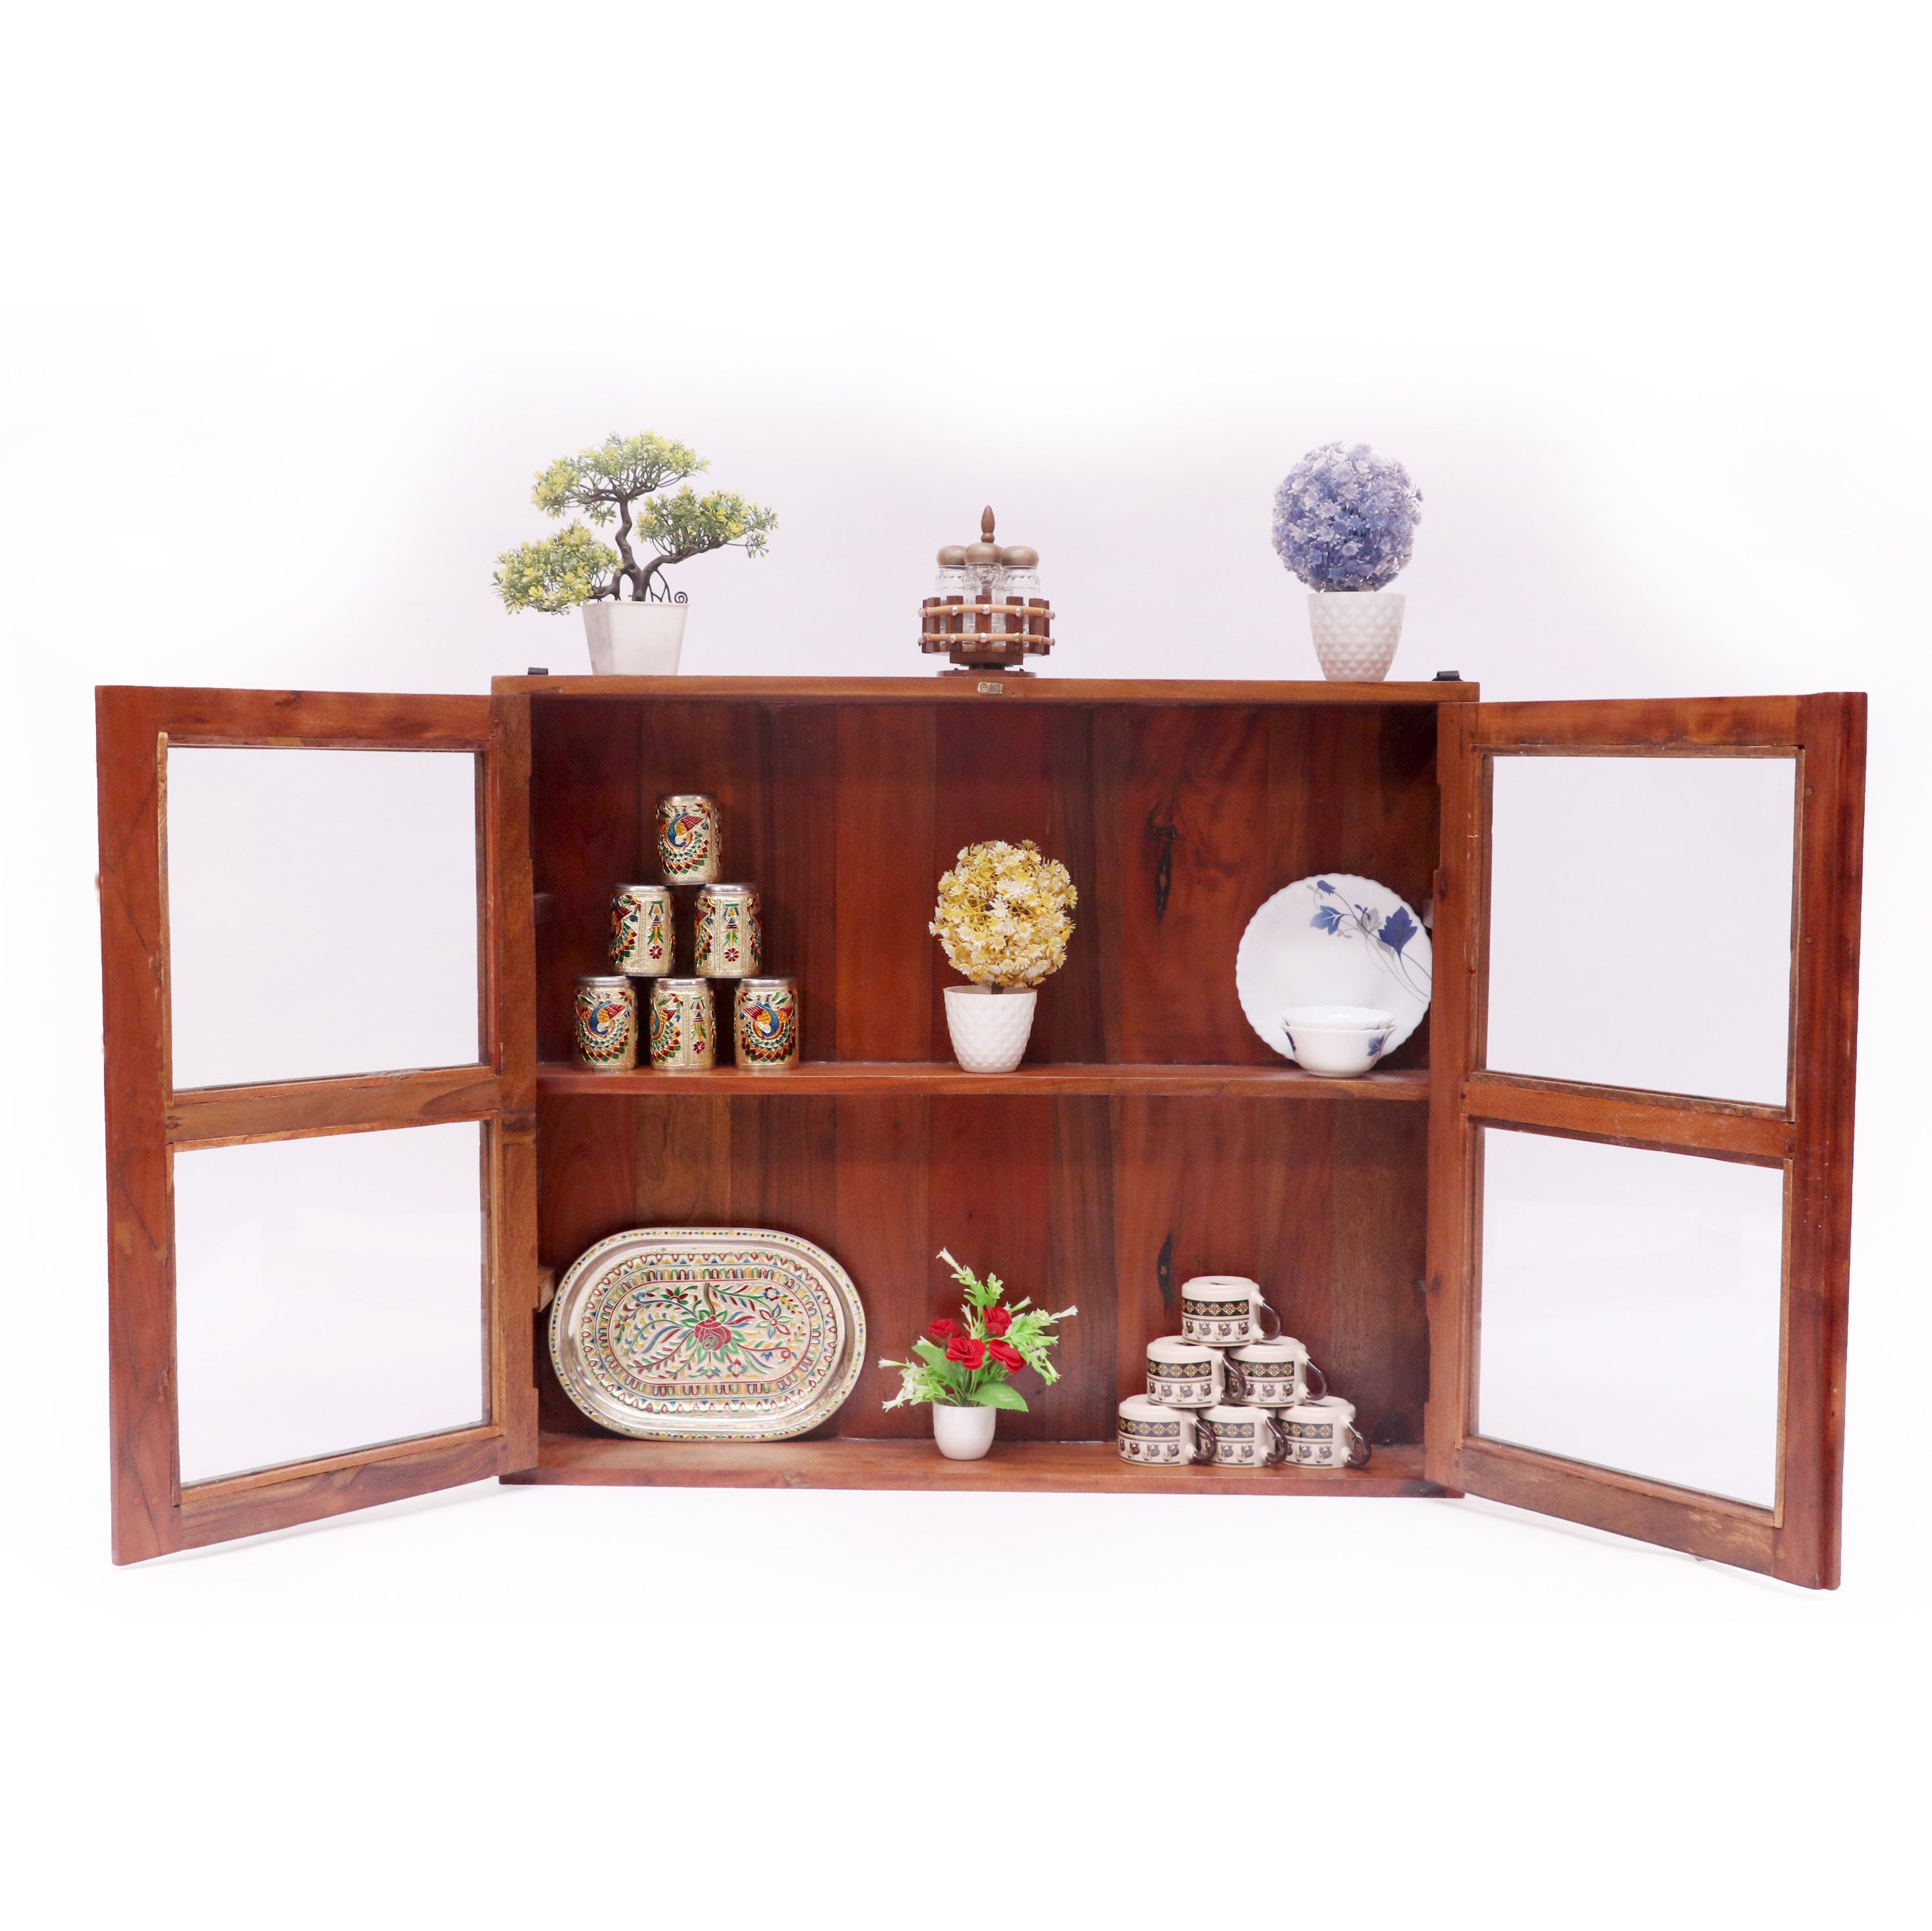 36 x 9 x 30 Inch Long Wide Hanging Cabinet Wall Cabinet